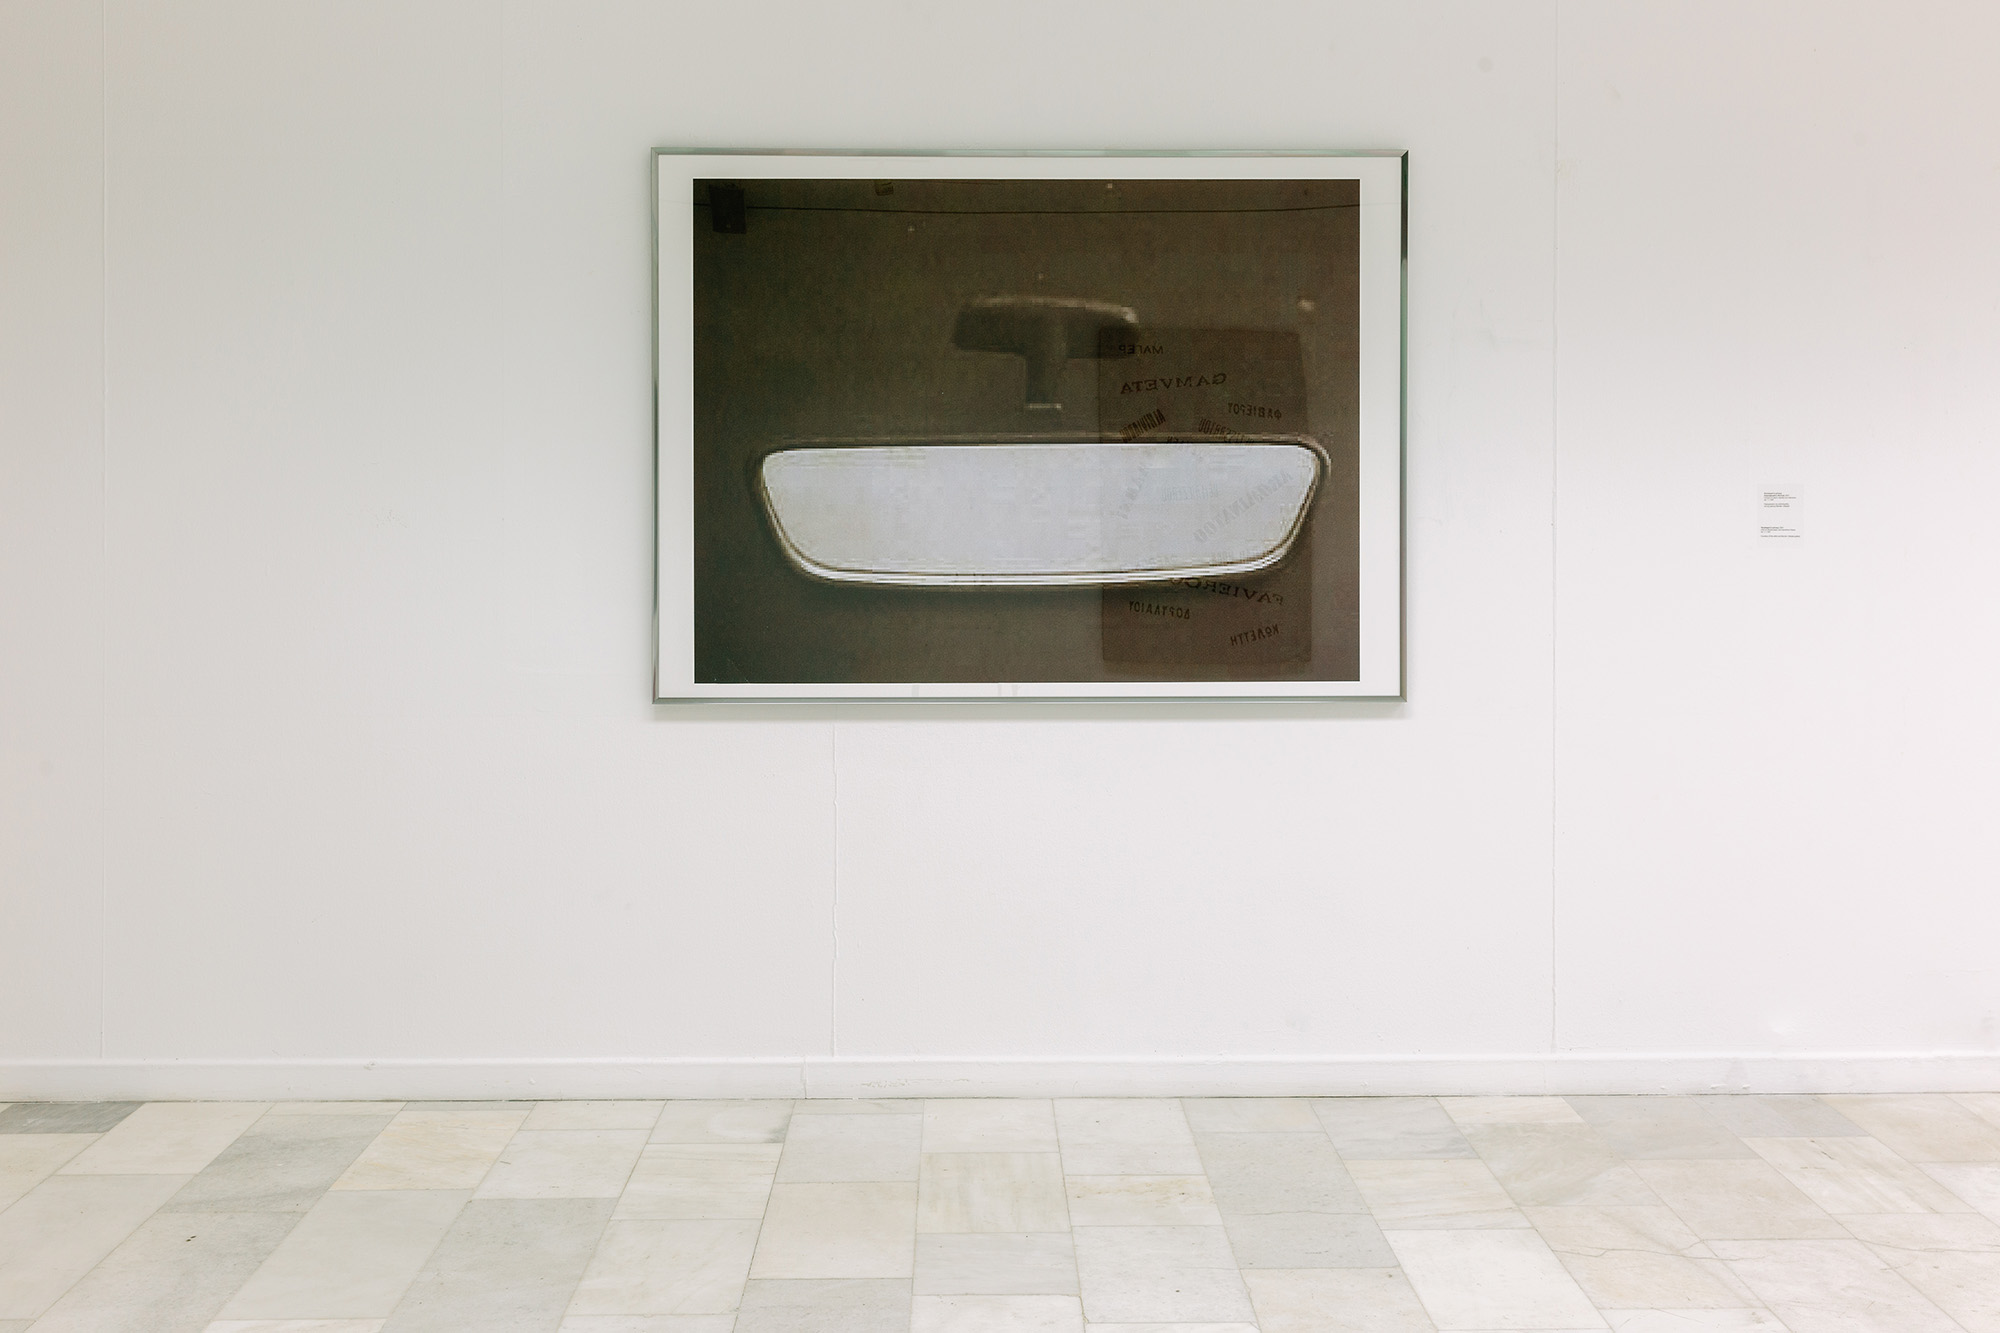 The piece, Developed in Privacy by the artist Rallou Panagiotou featuring the photgraph of a rearview car mirror.